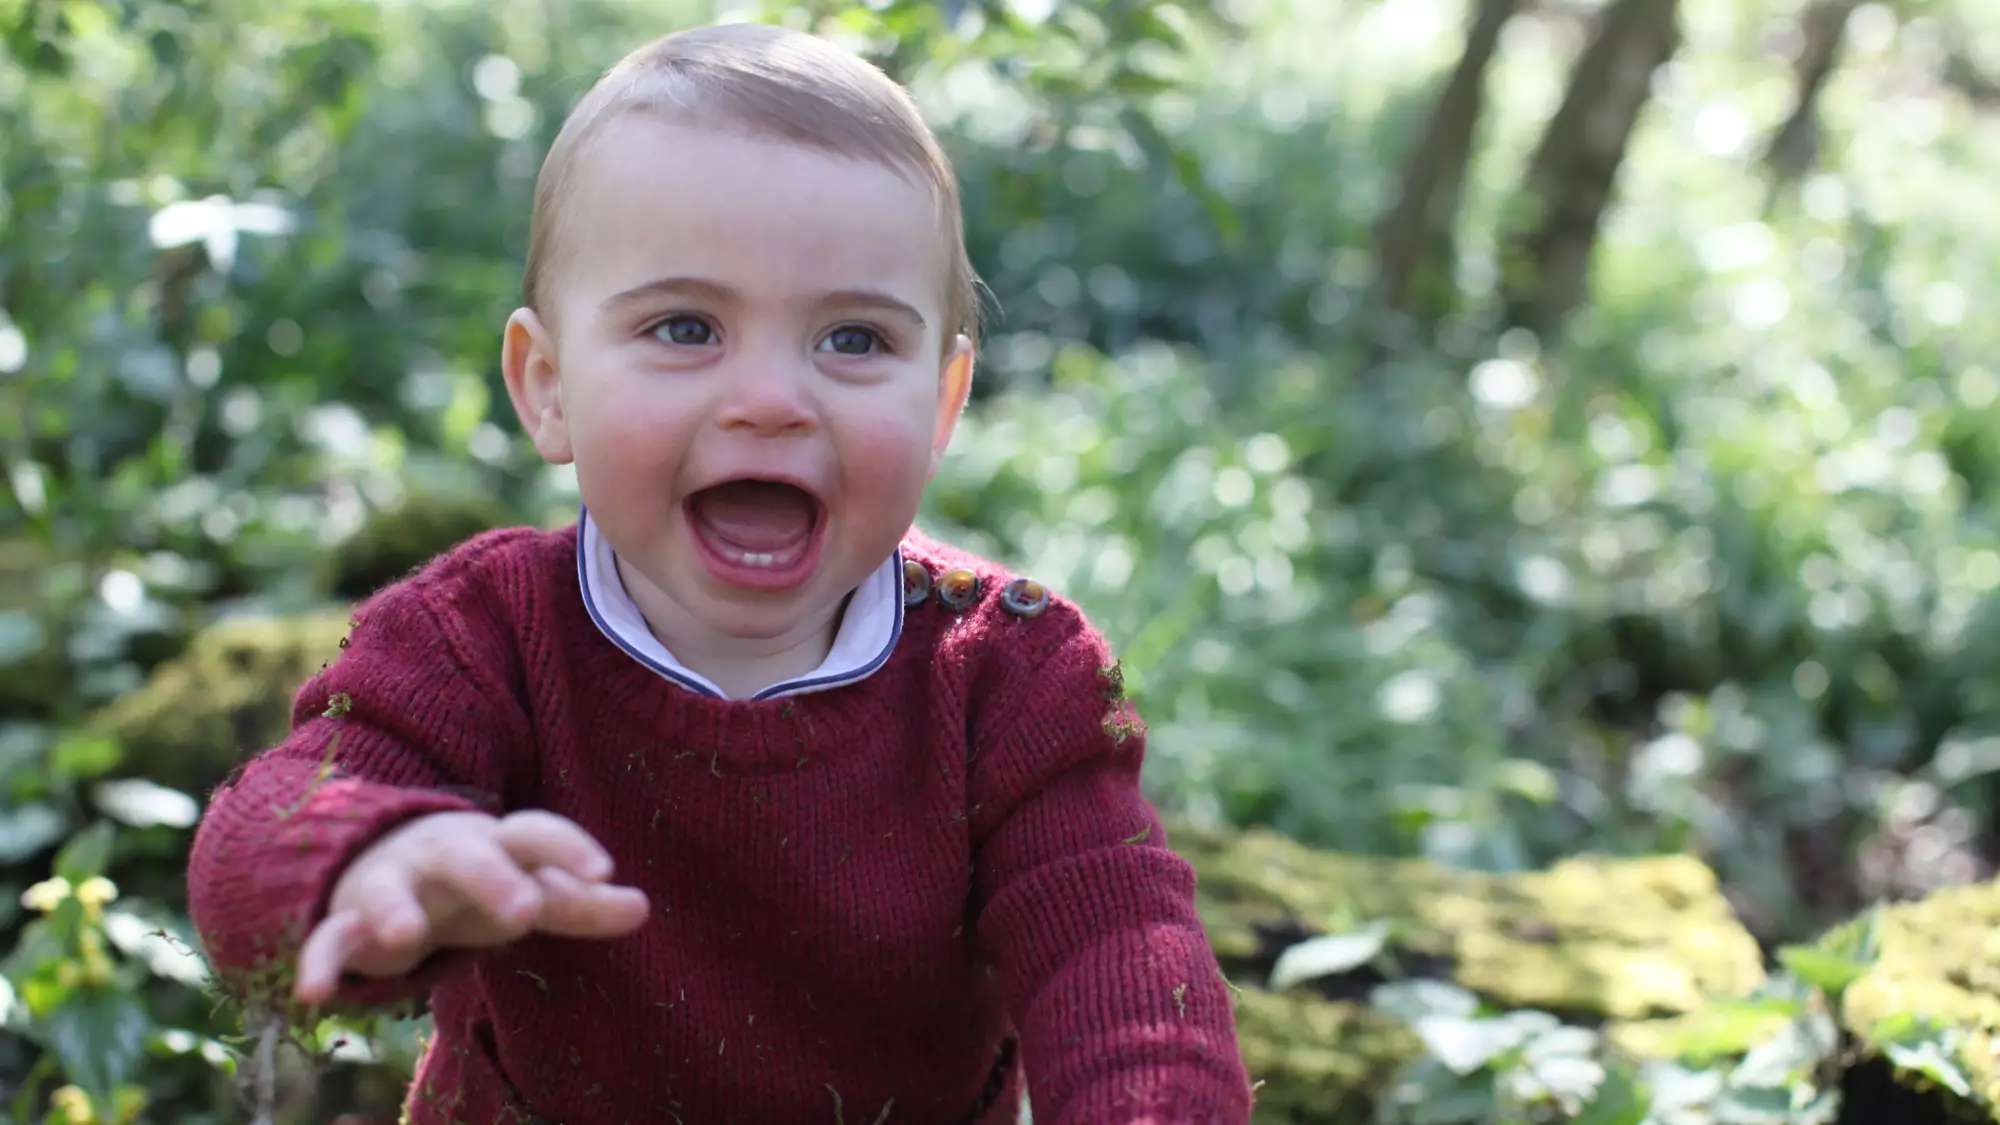 Prince Louis' First Birthday Pictures Are Here And They're Adorable